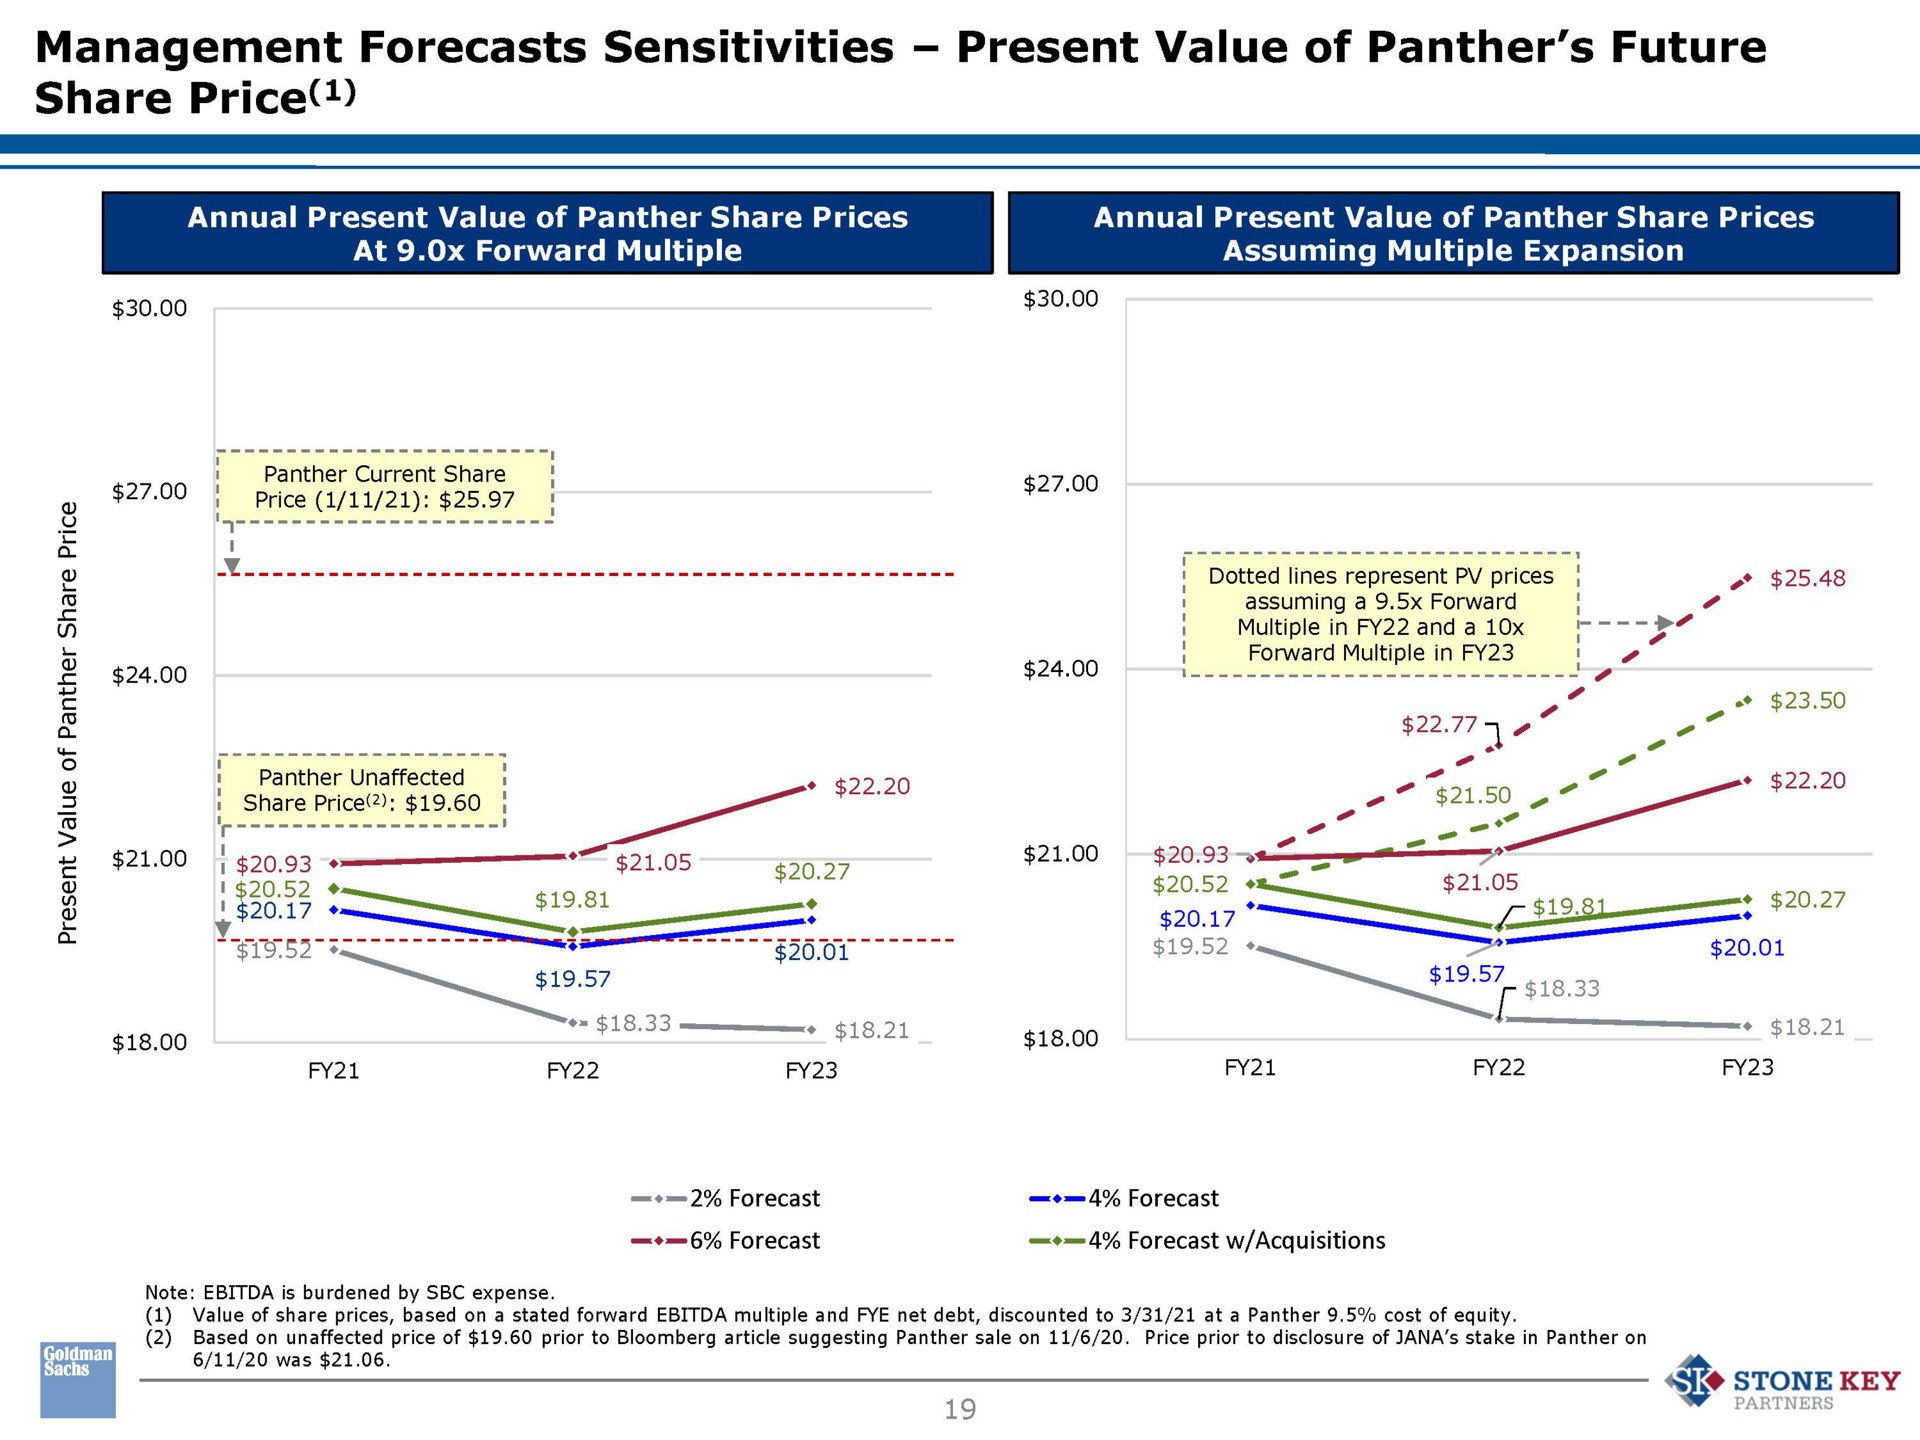 management forecasts sensitivities present value of panther future share price price fees owe panther unaffected share price | Perspecta